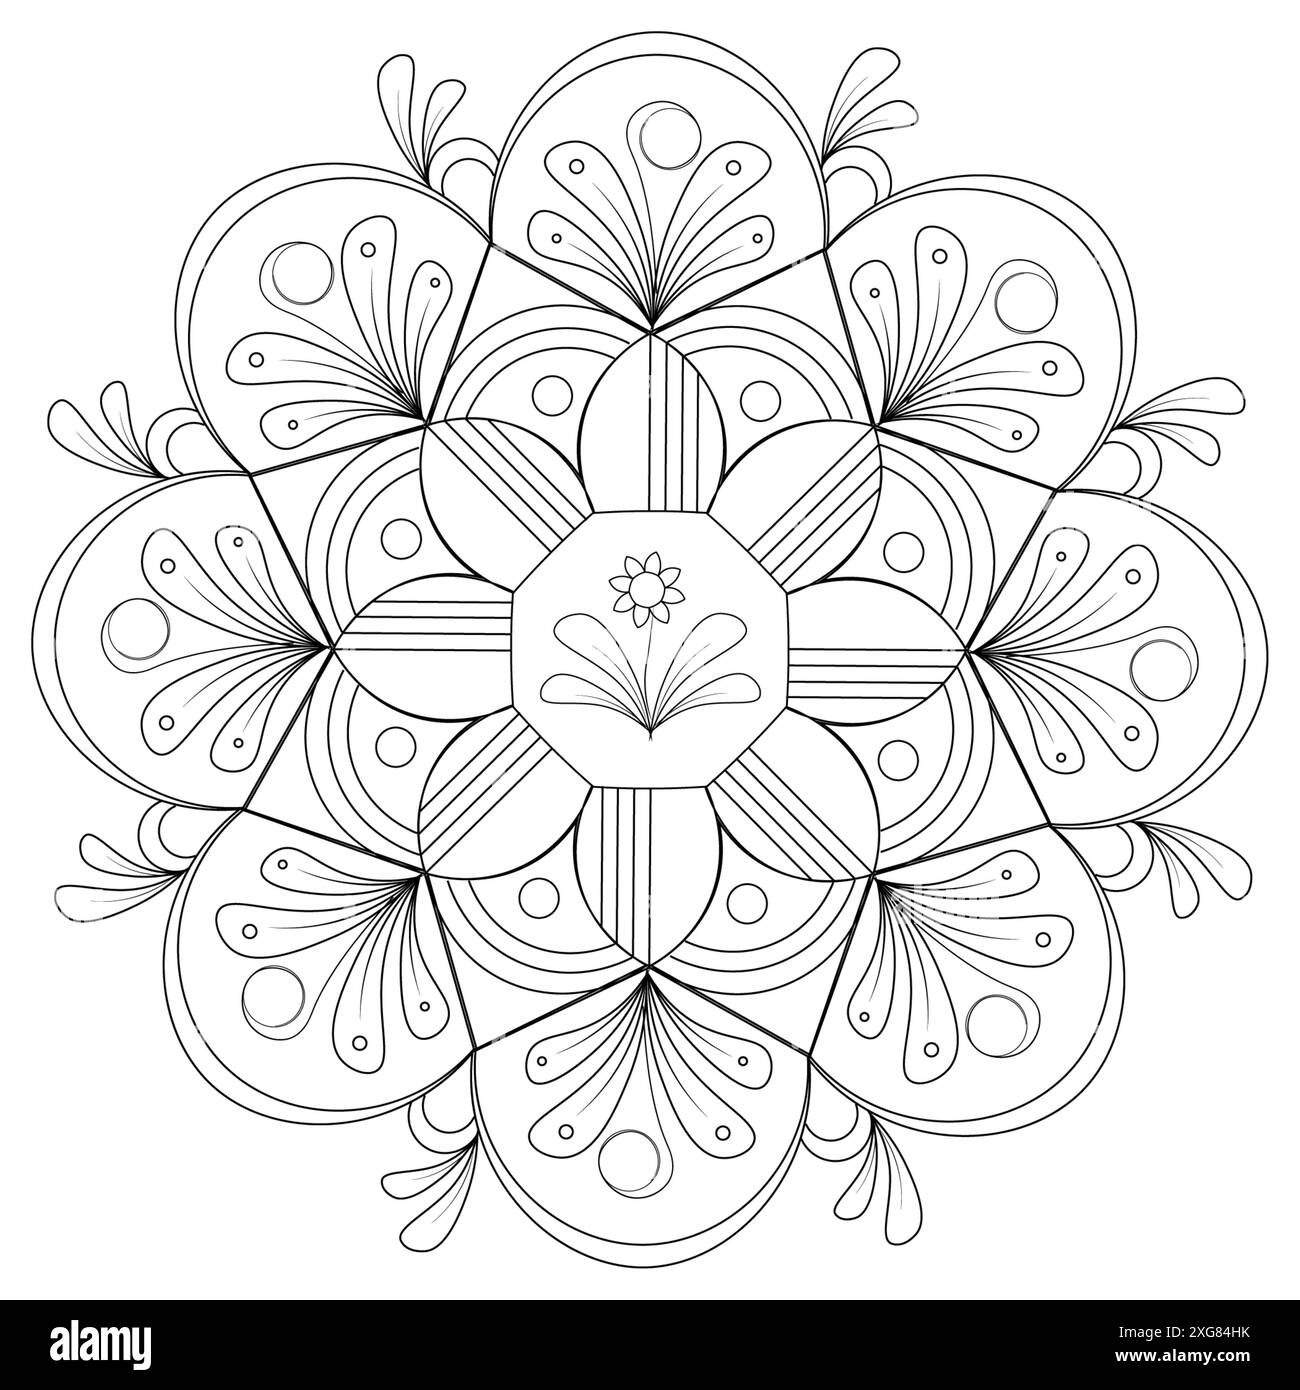 A black image of a circular design on a  white background. Black mandala in vector white background. Laconic mandala with plant elements: flower, buds Stock Photo